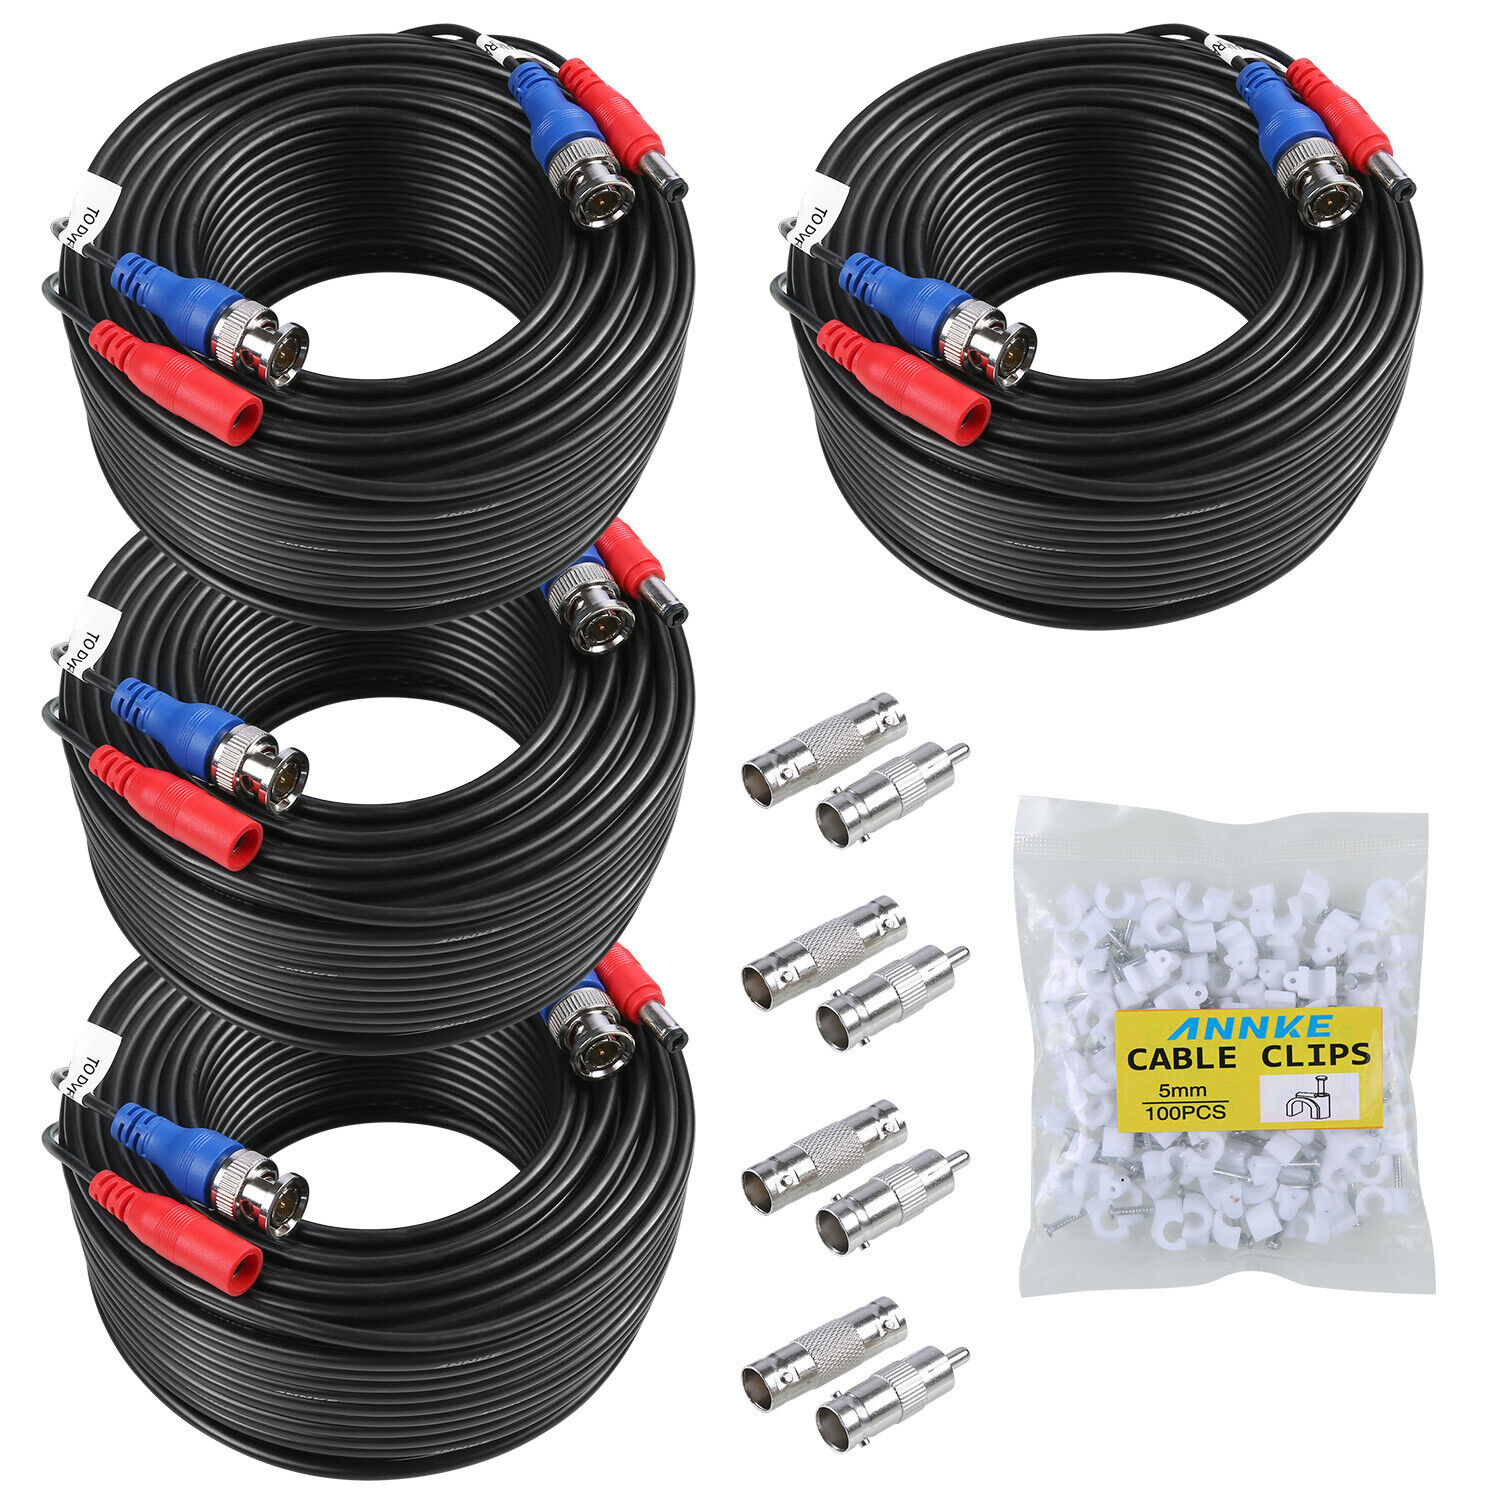 ANNKE 4x100ft Security Camera Video Power Cable BNC RCA CCTV DVR Extension Cord